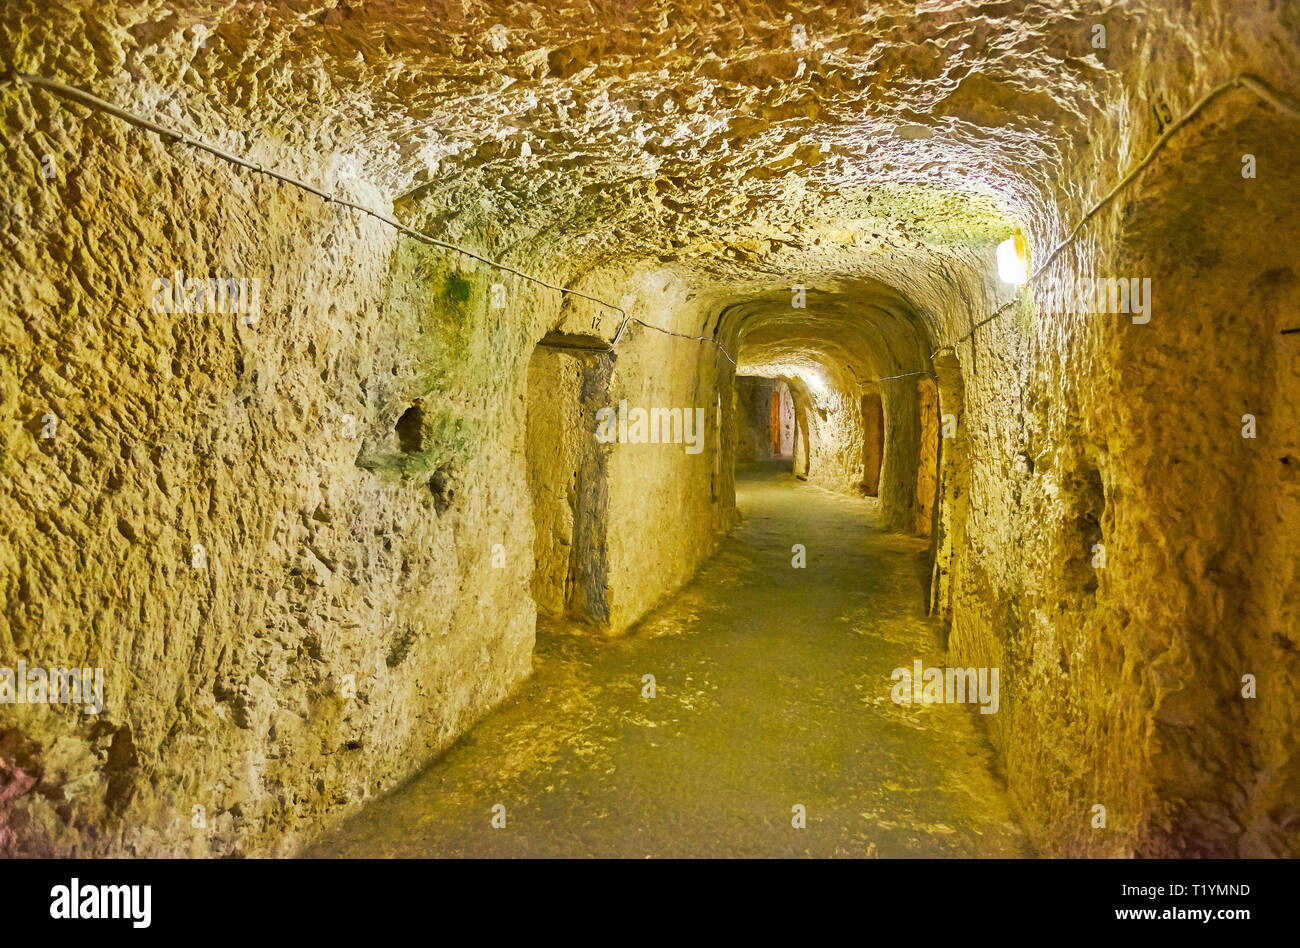 RABAT, MALTA - JUNE 16, 2018: The long stone tunnel with small shelters, located under historical Wignacourt Residence was used during the WWII, on Ju Stock Photo